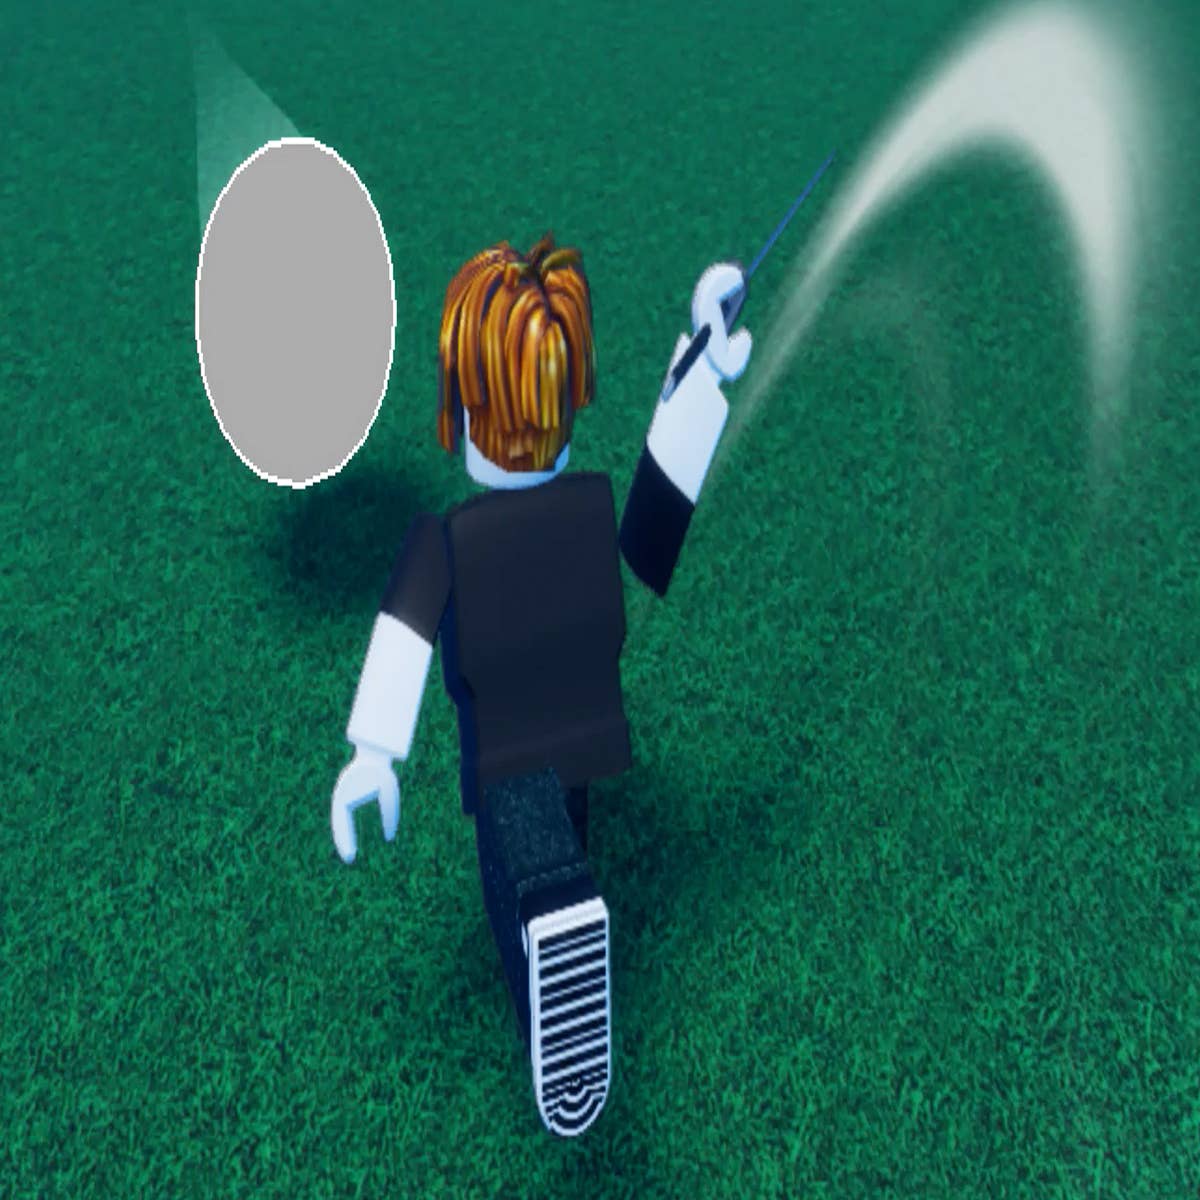 BLADE BALL IS TAKING OVER ROBLOX!! 